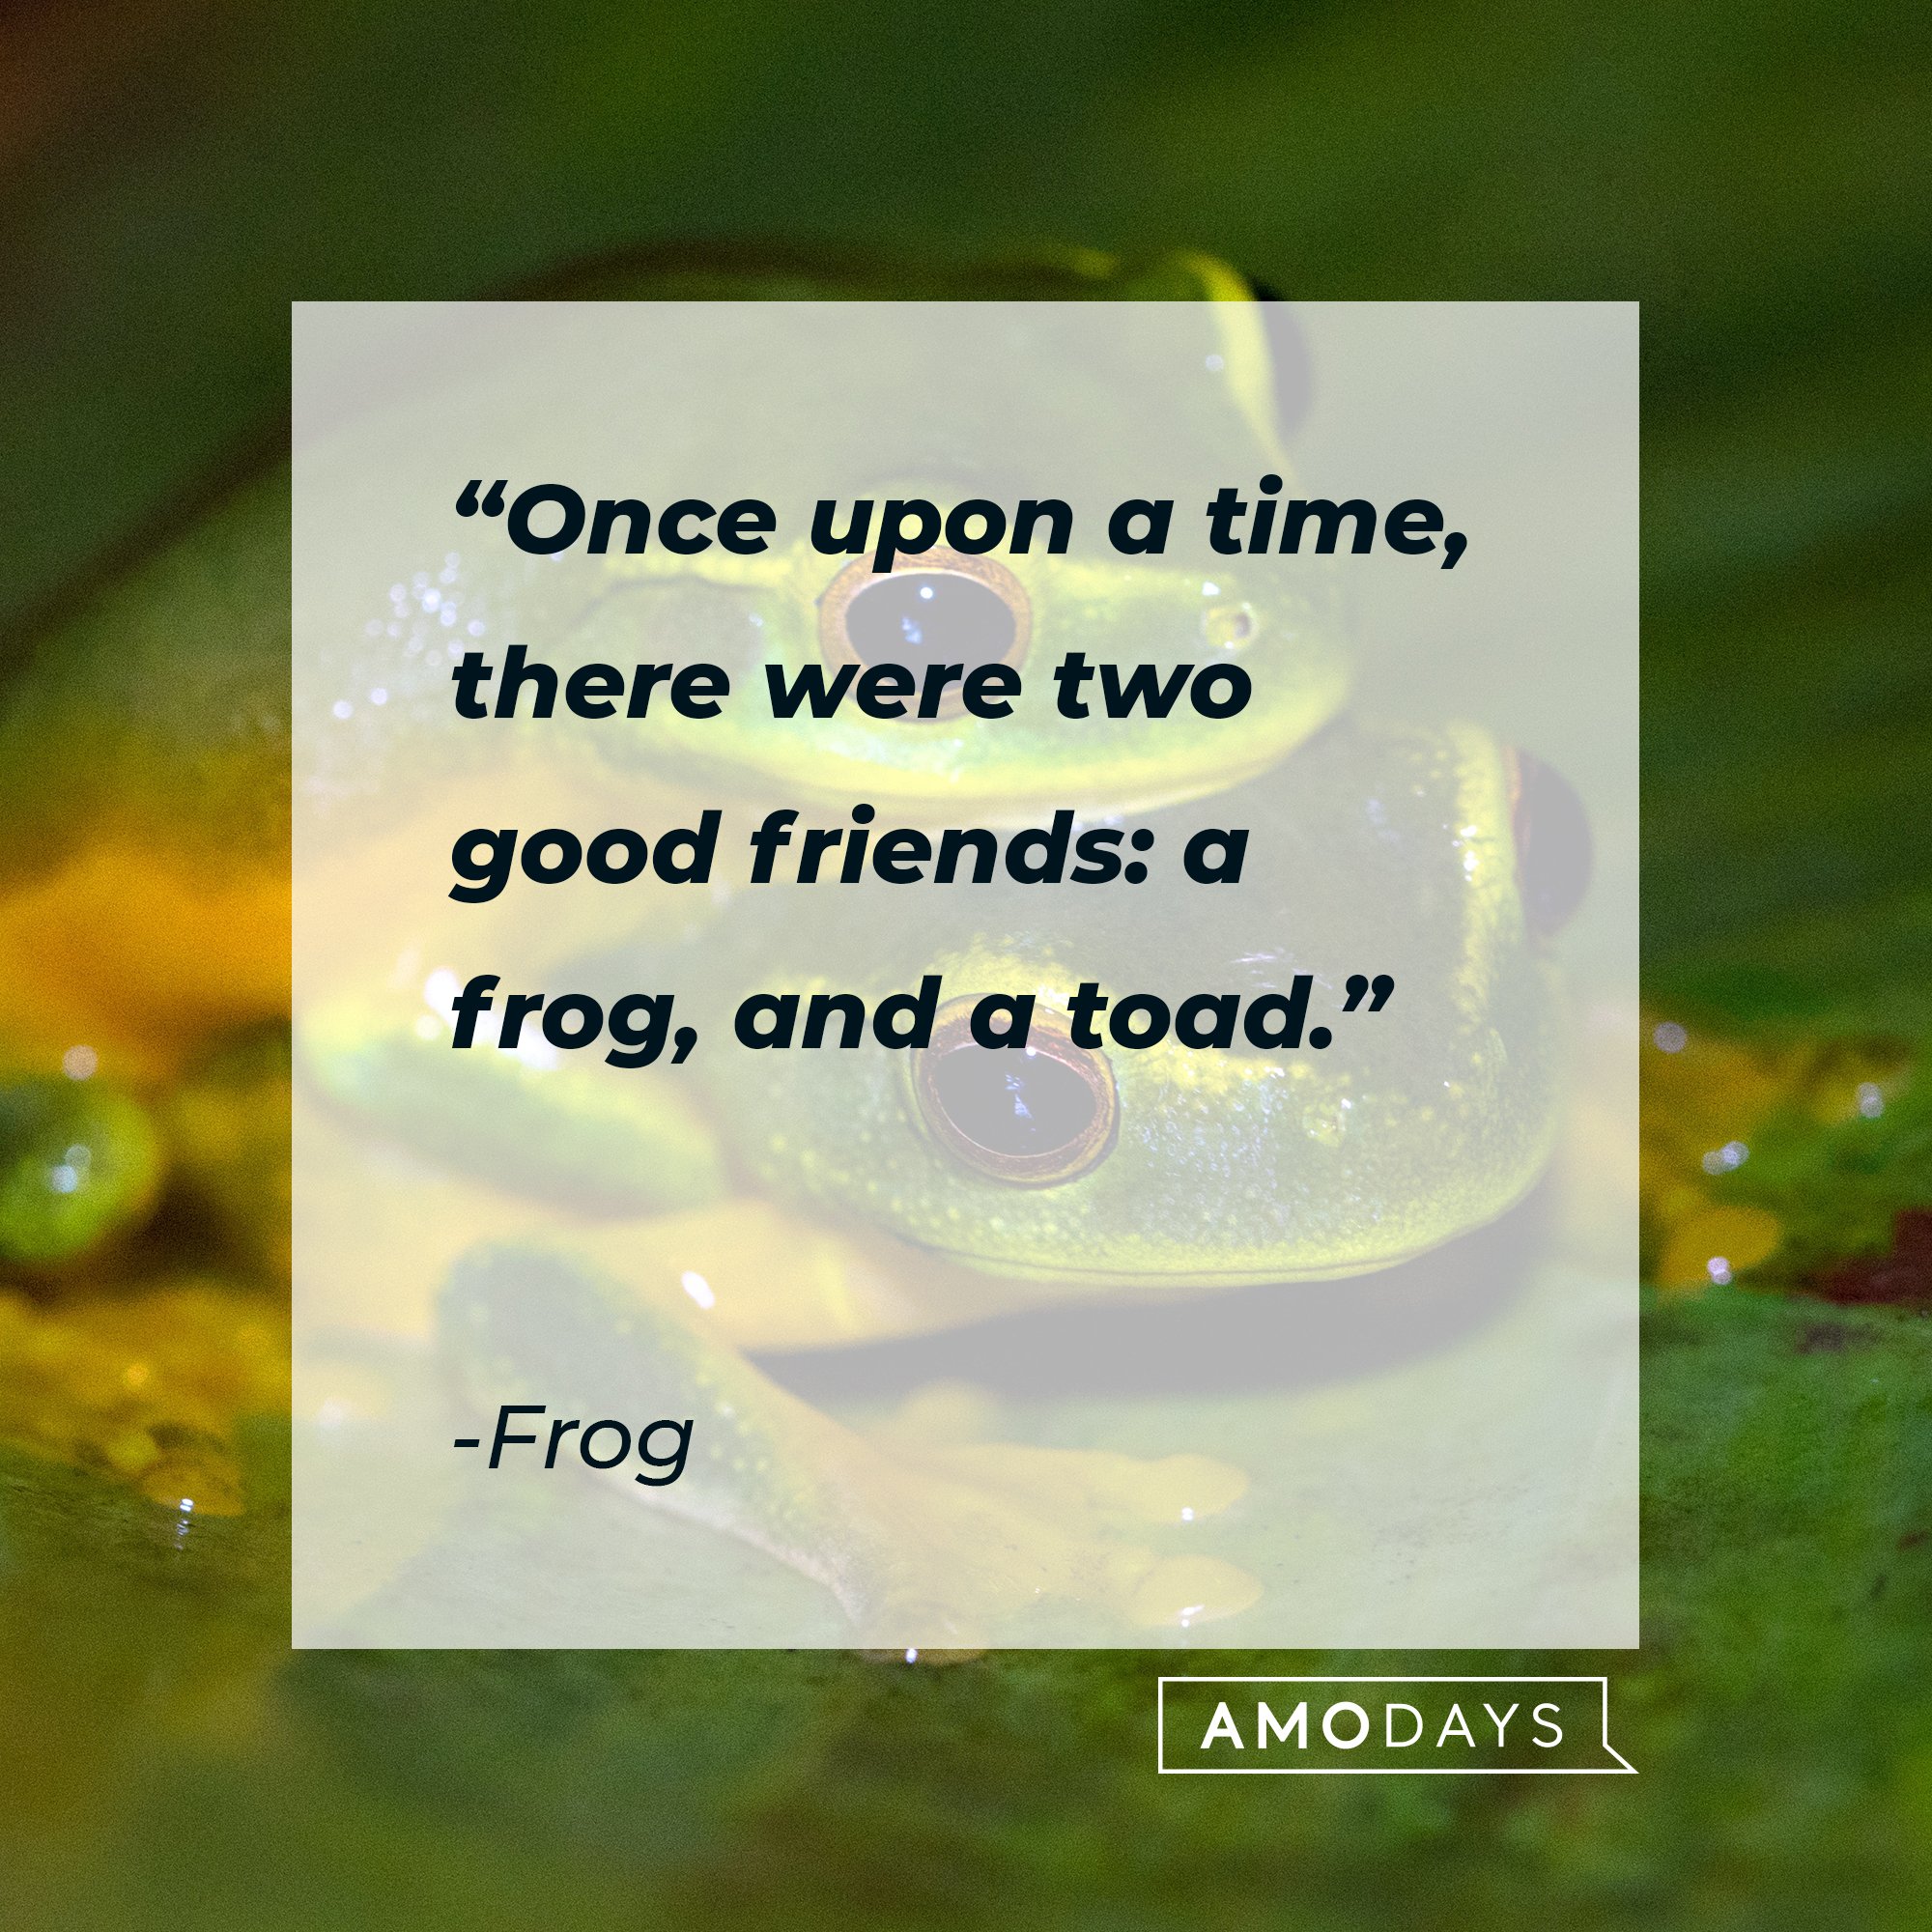 Frog's quote: "Once upon a time, there were two good friends: a frog and a toad” | Image: AmoDays